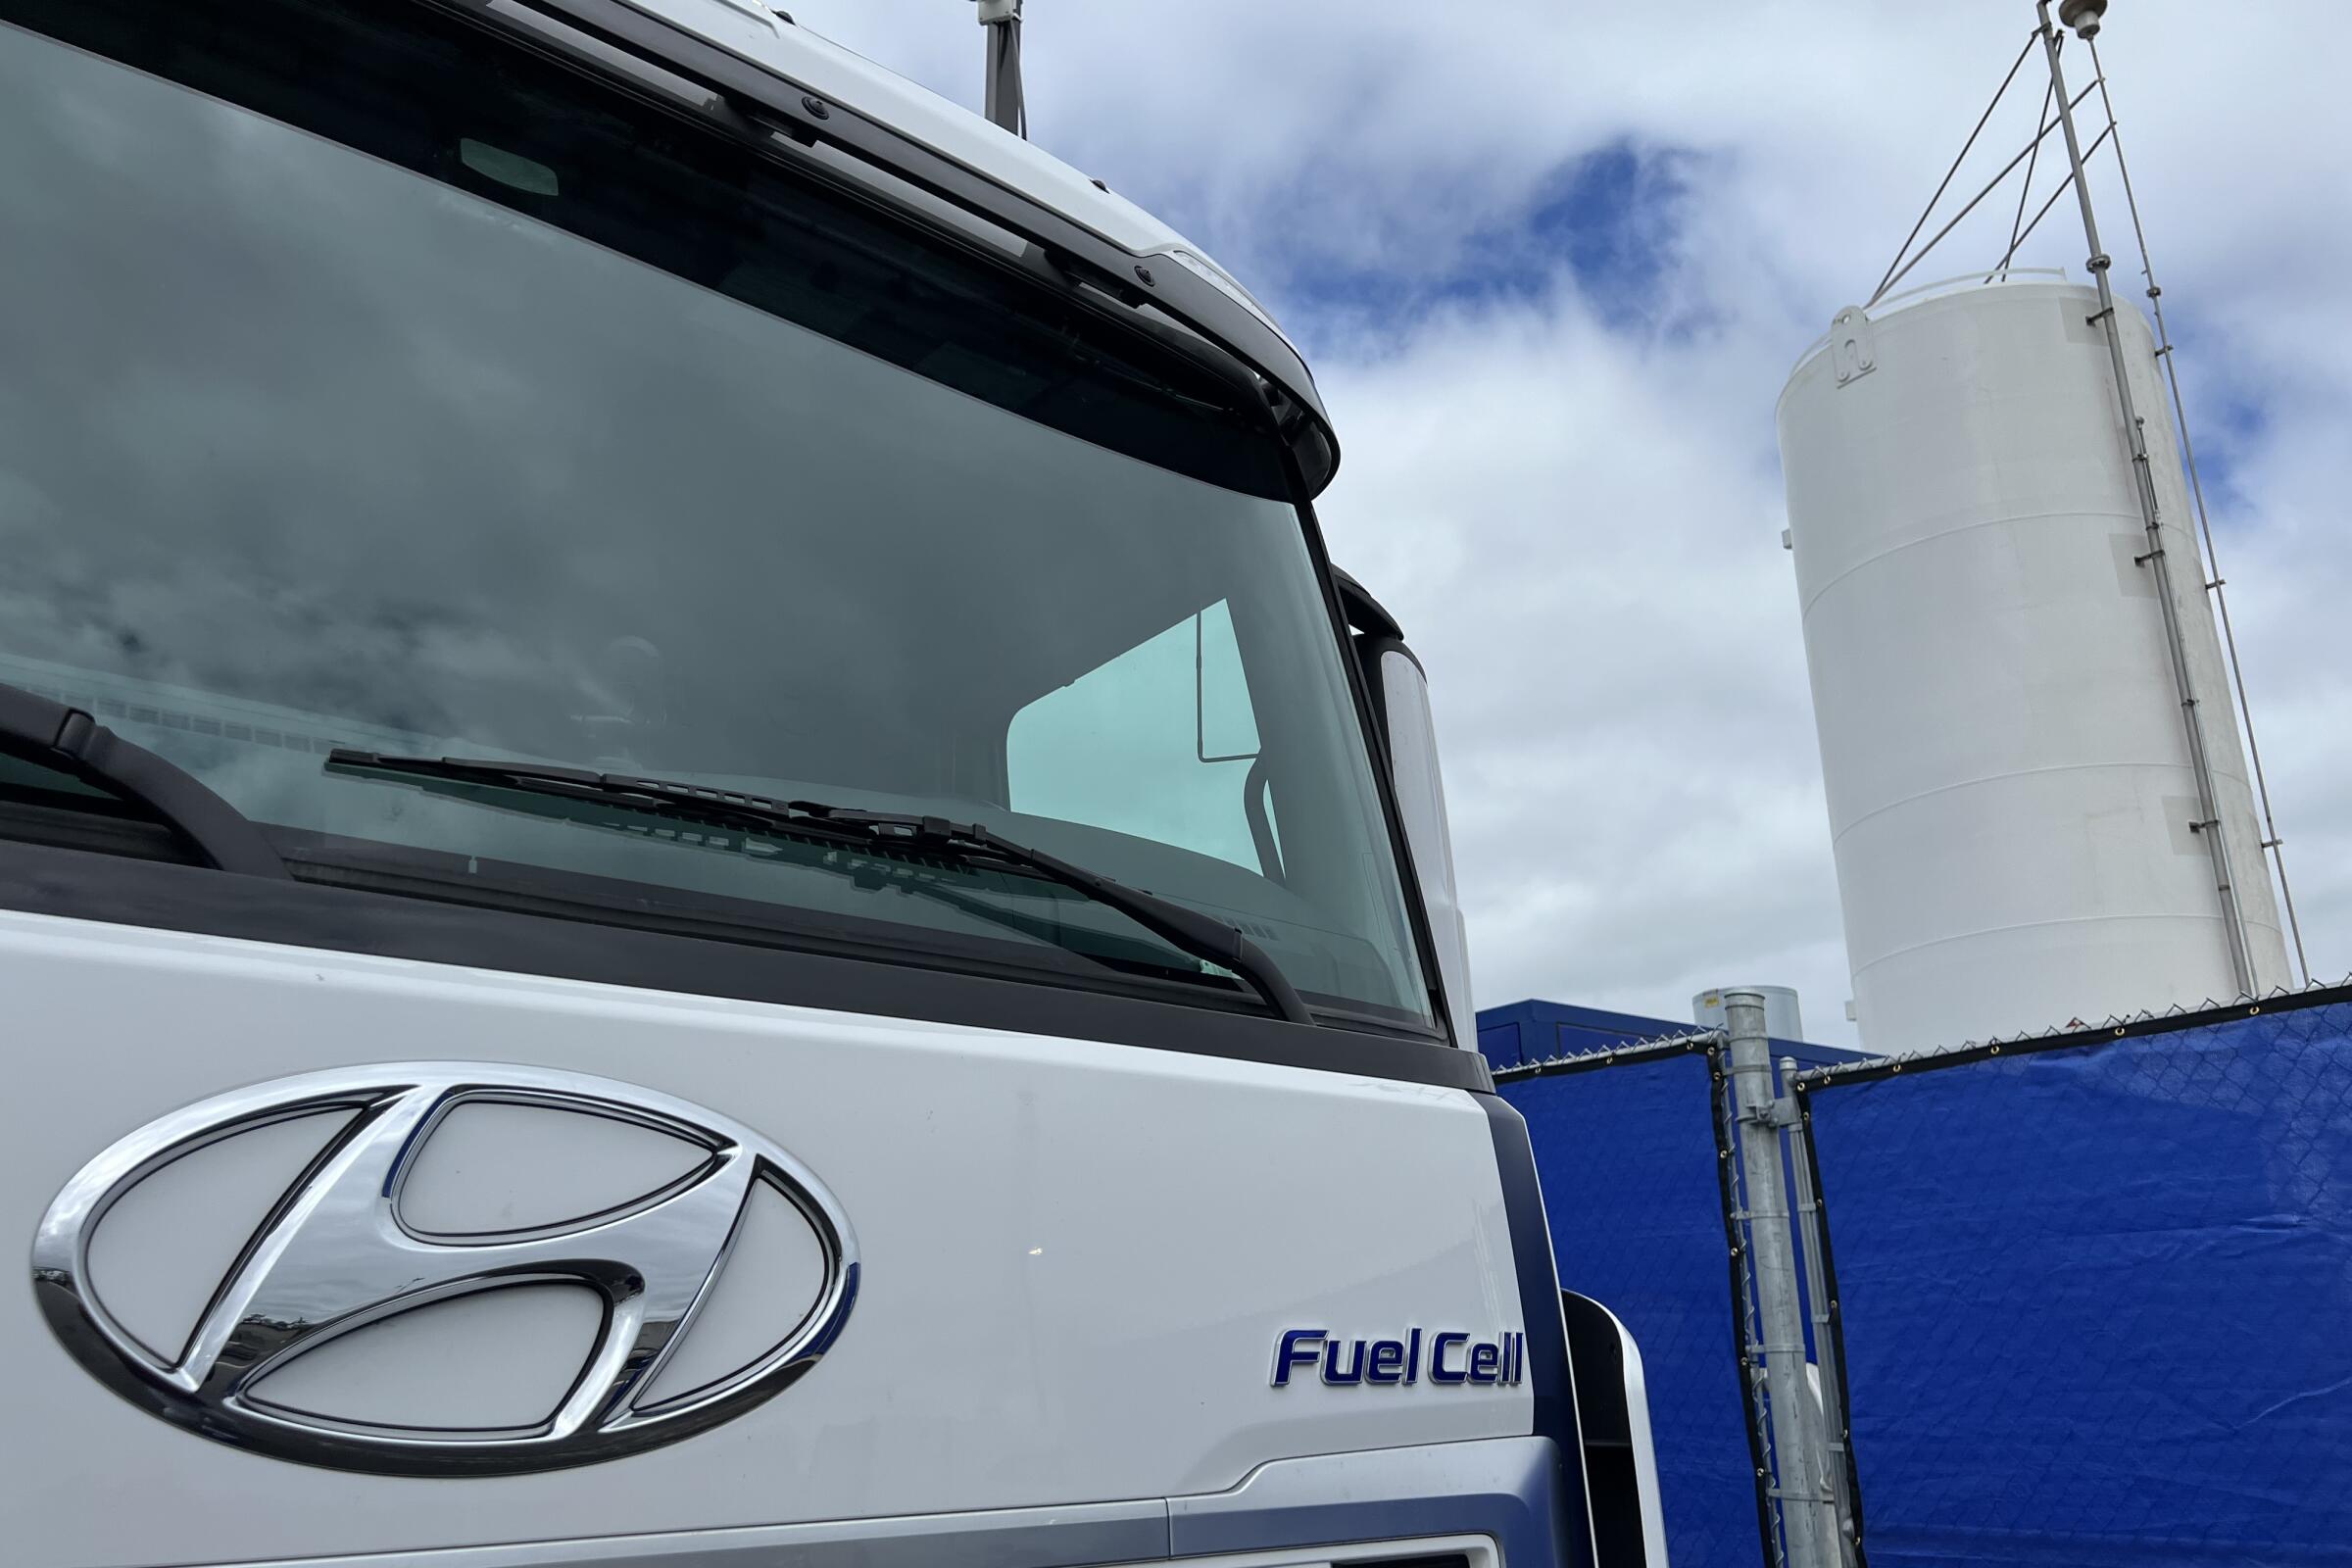 The front of a fuel-cell truck.